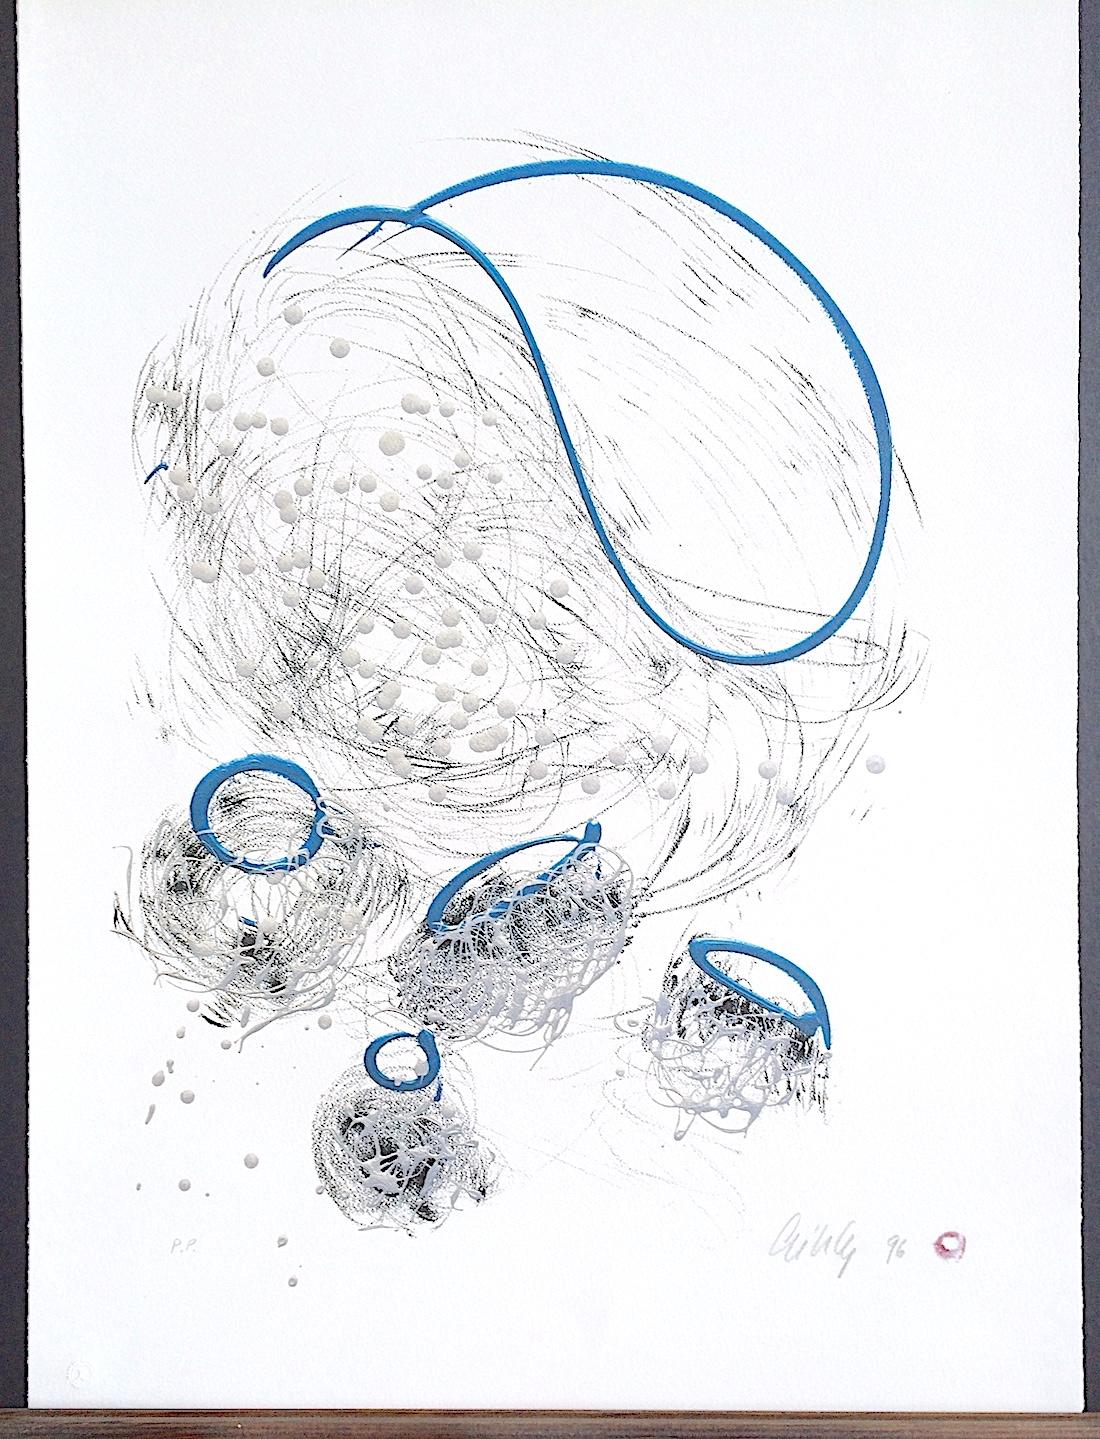 BASKET DRAWING, by Dale Chihuly(American b.1941) renowned glass sculpture artist depicts one of his signature abstract basket forms. This limited edition lithograph was printed in 8 colors on archival printmaking paper 100% rag. BASKET DRAWING is